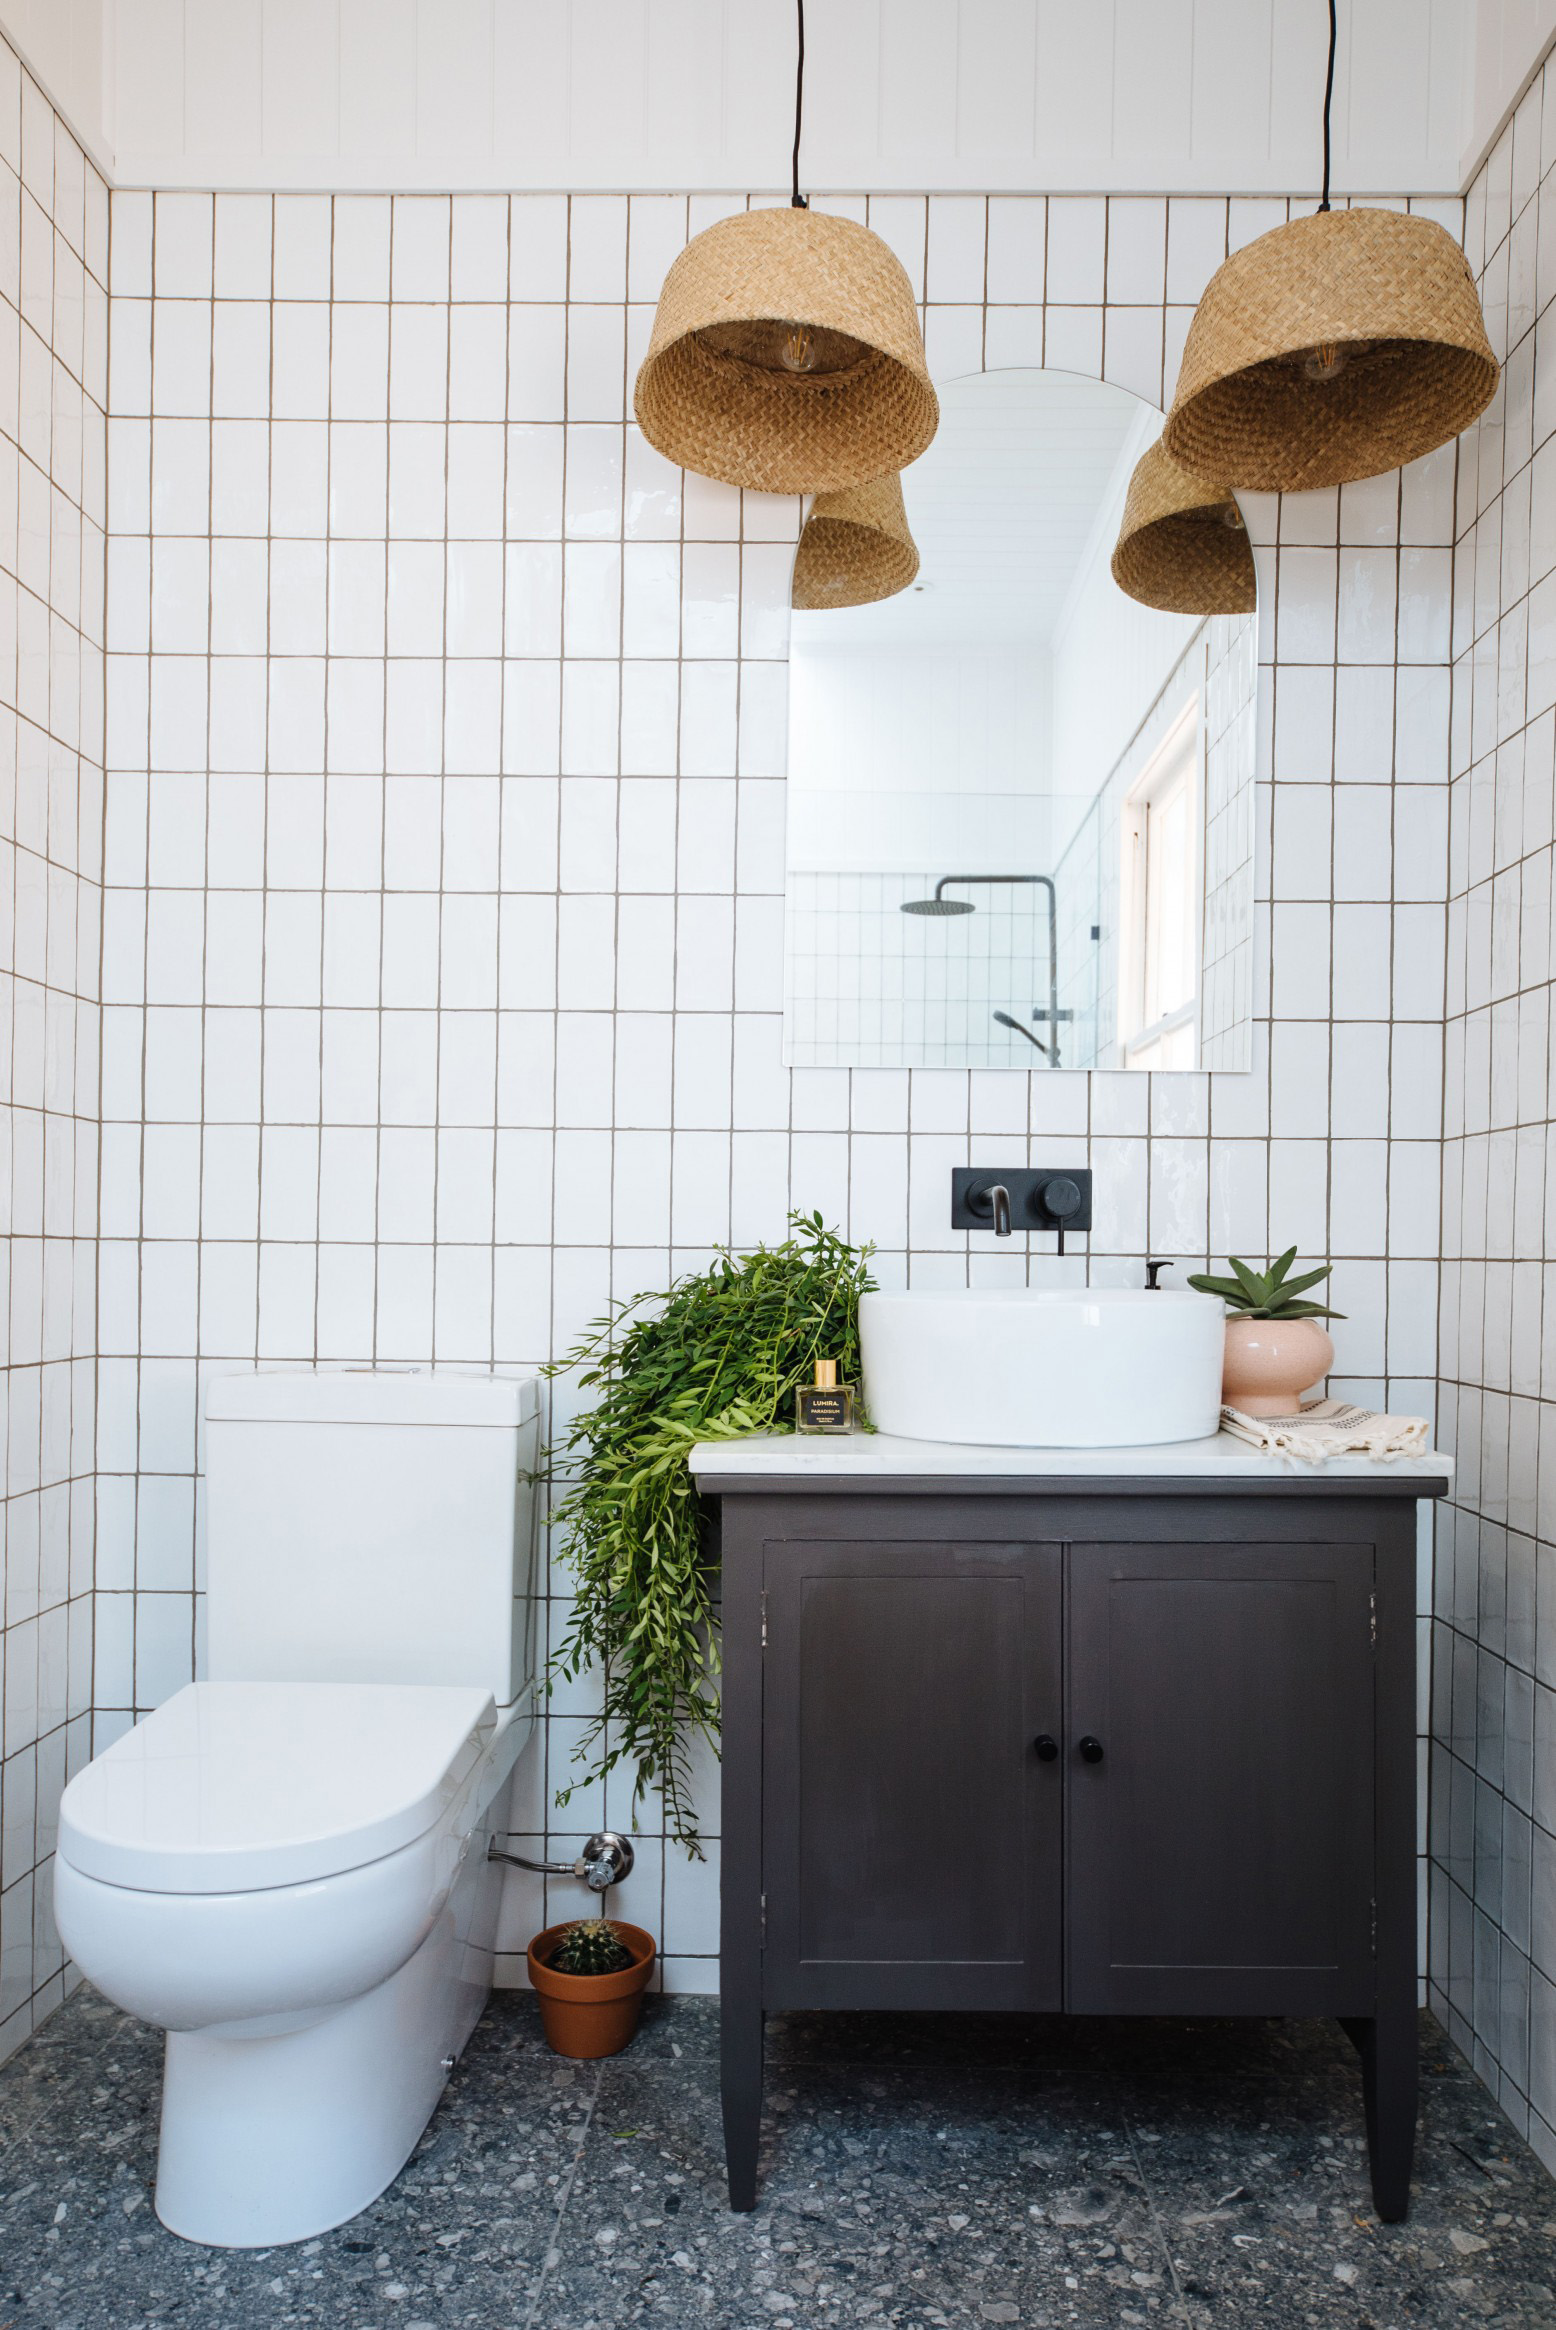 Renovation Reveal: The Bathrooms!